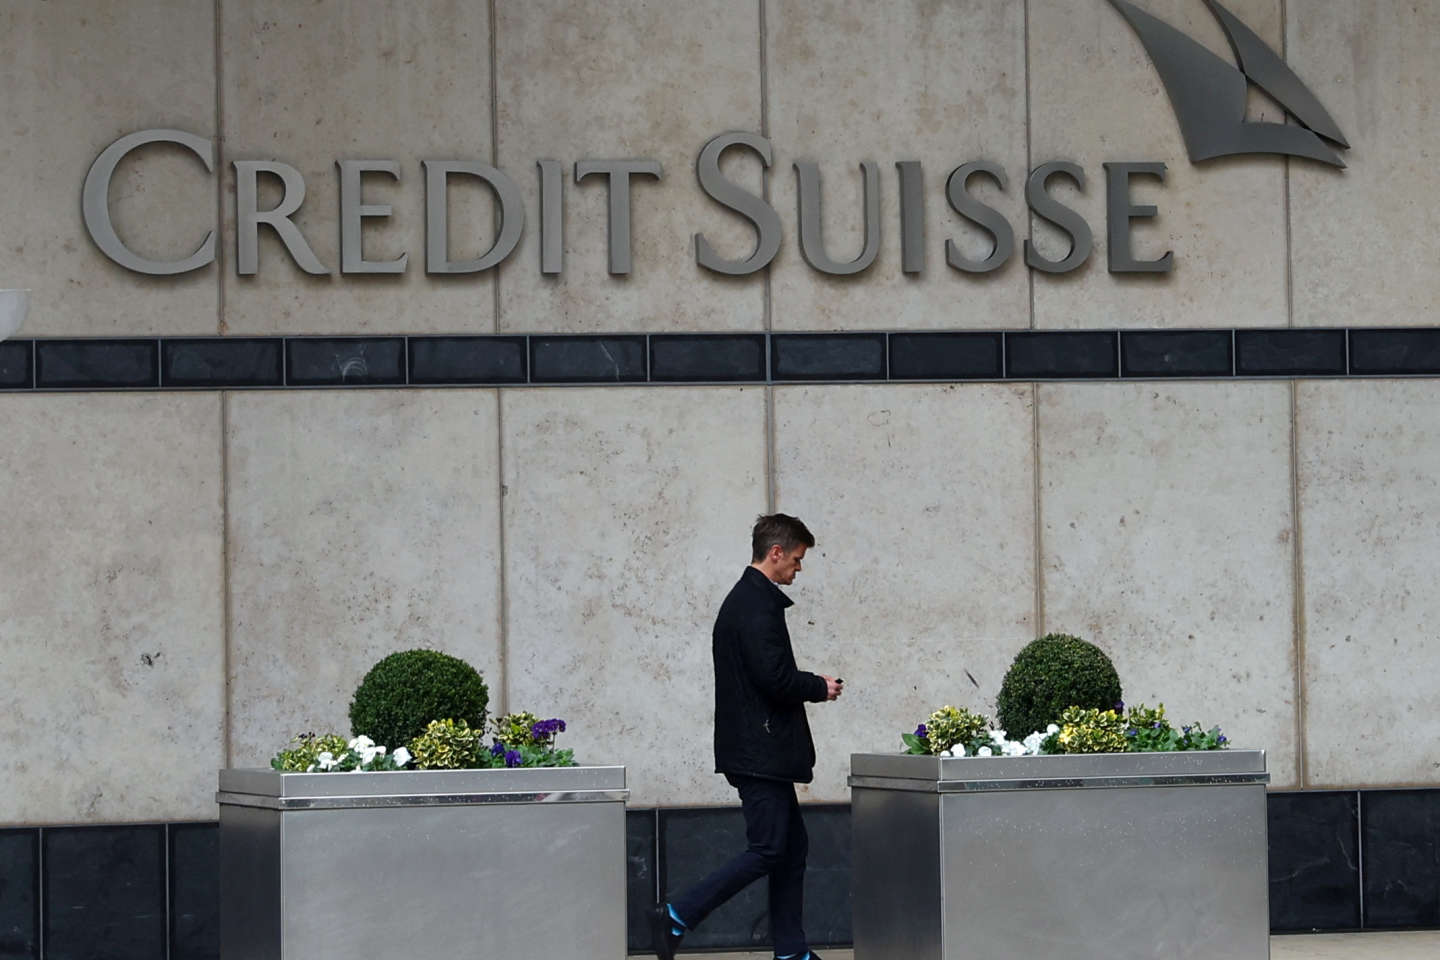 Credit Suisse stock rebounds with help from central bank